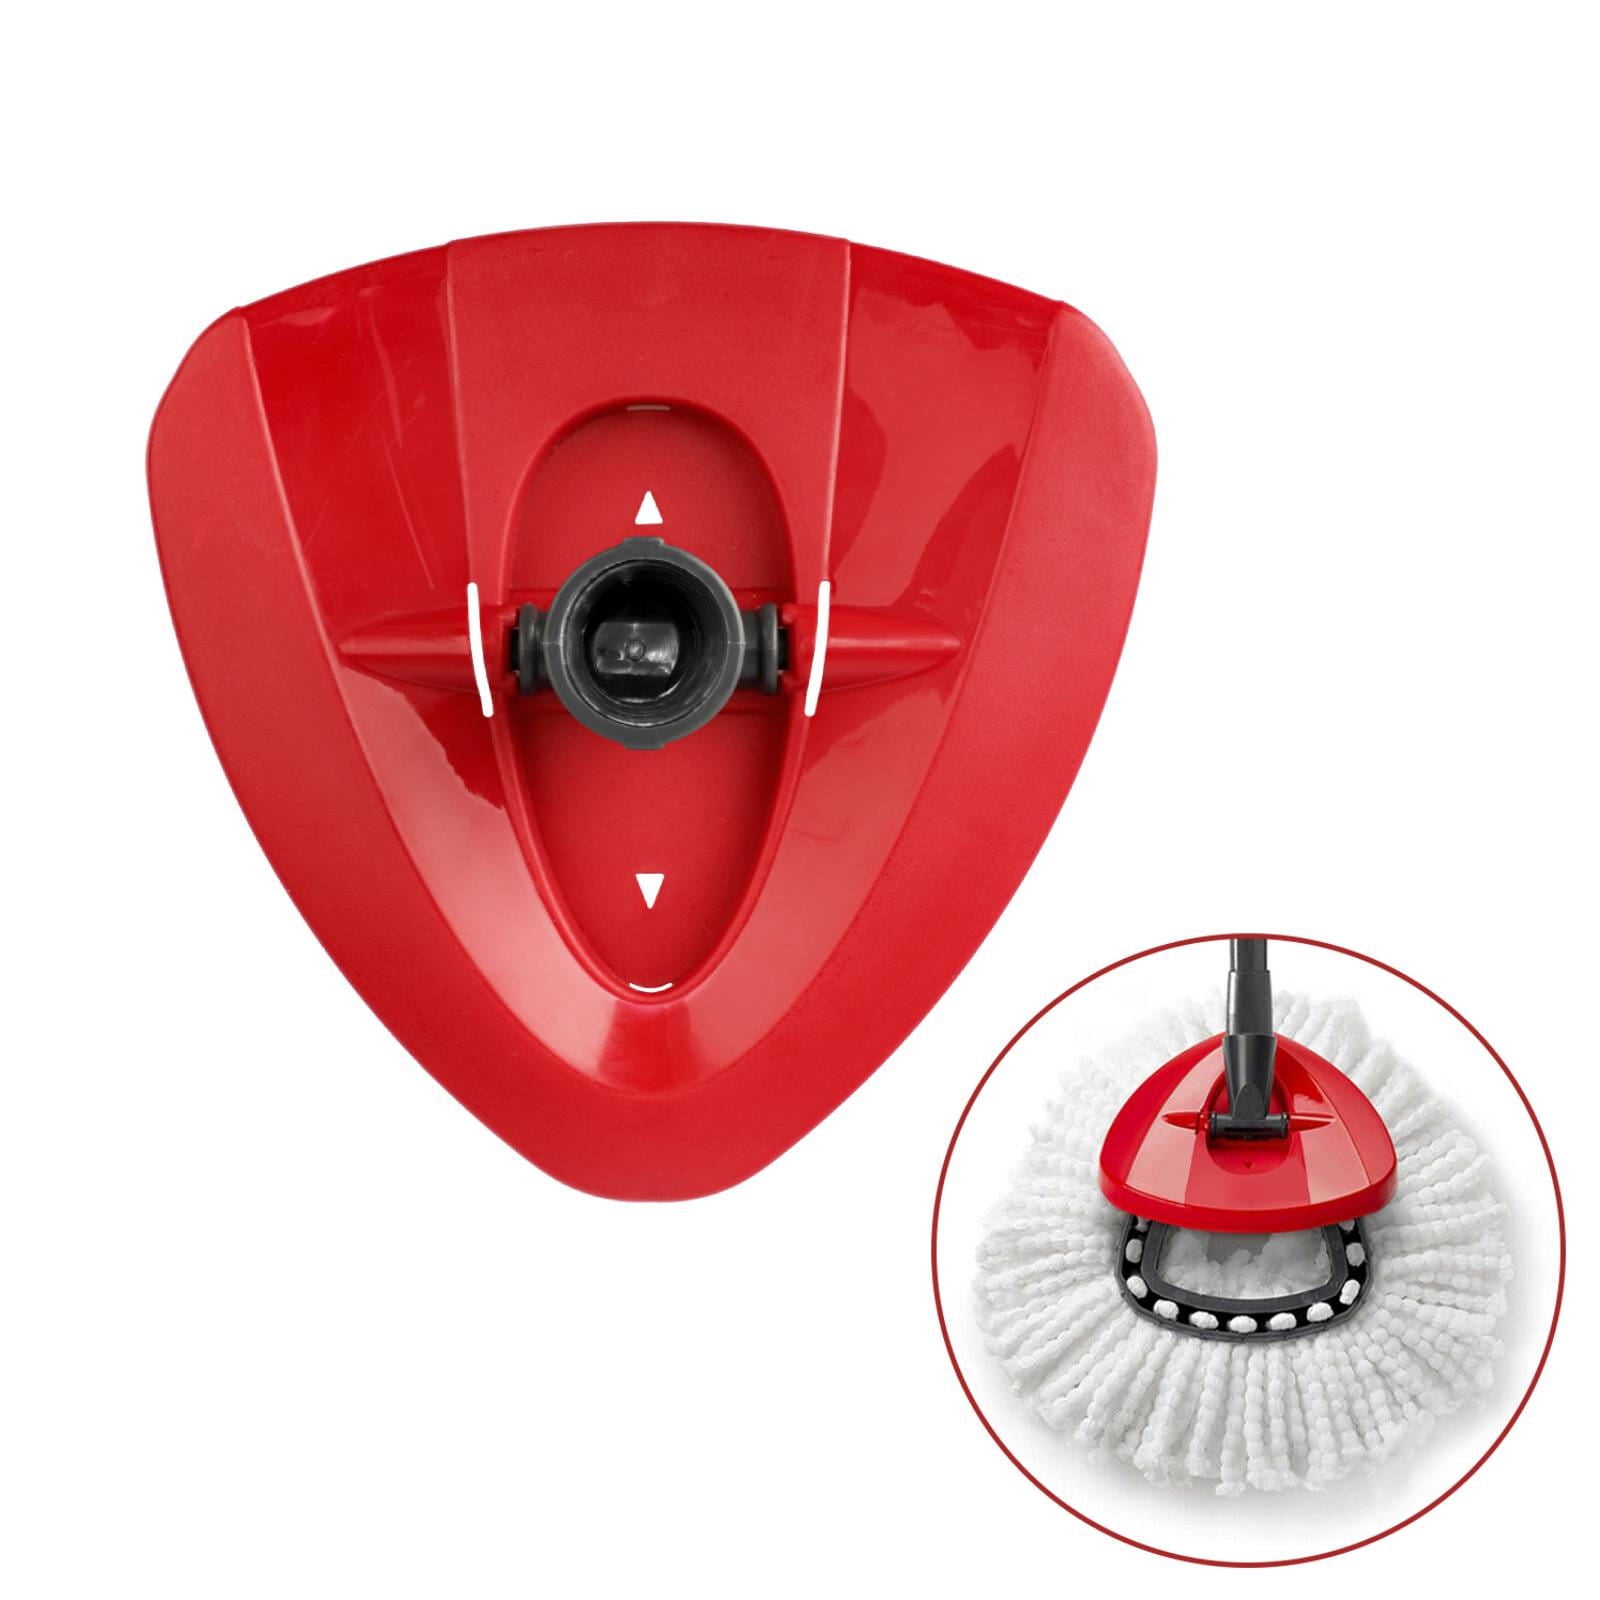 Spin Mop Replacement Base Head Rotating Triangle Spinning Mop Replace Cover Plastic Base Case Disc Accessories Part 1 Ct 